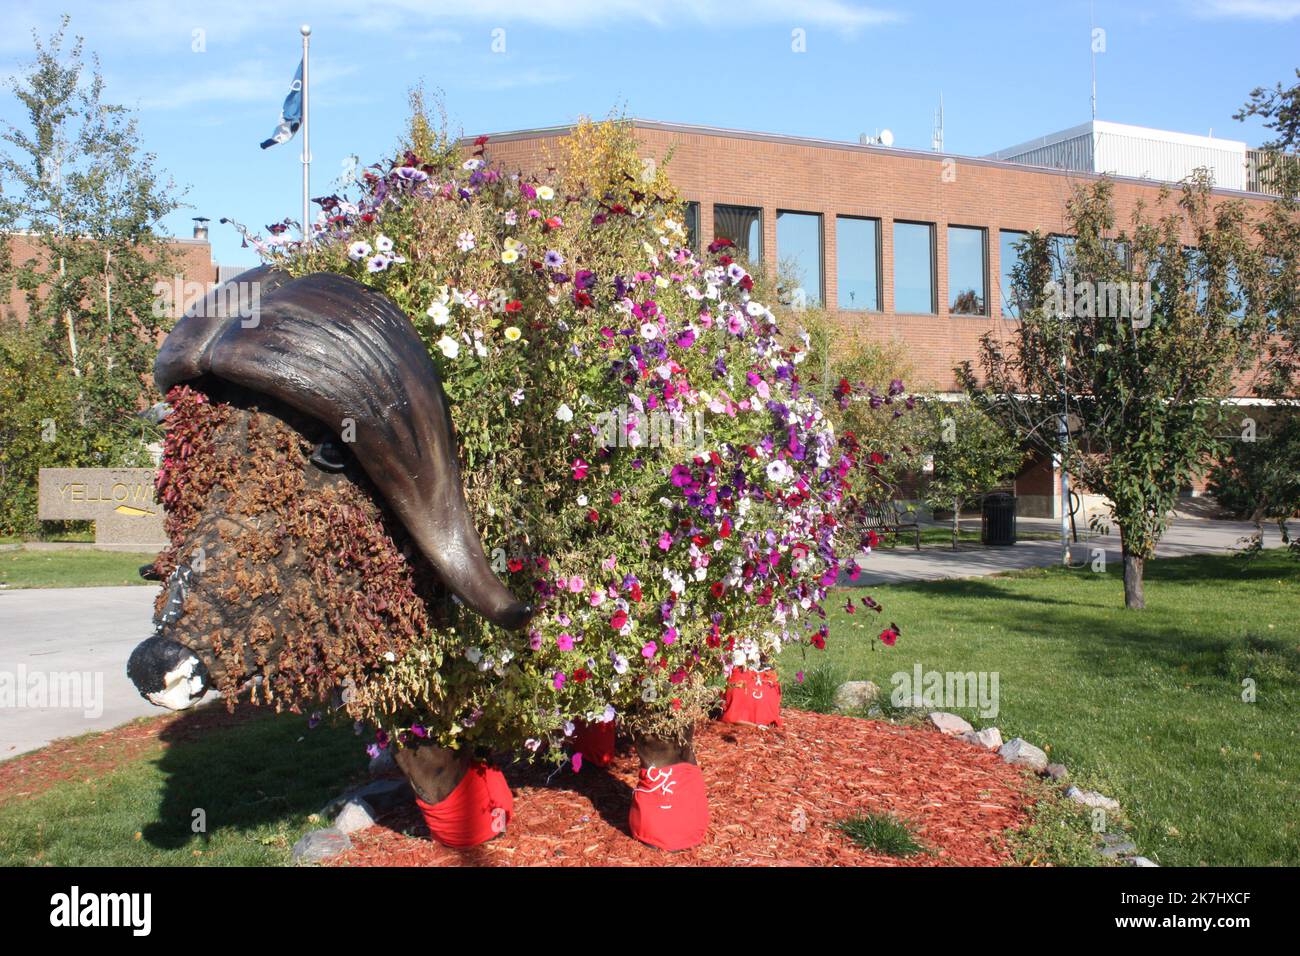 Flower design in the shape of a musk ox outside City Hall in Yellowknife, Northwest Territories, Canada Stock Photo